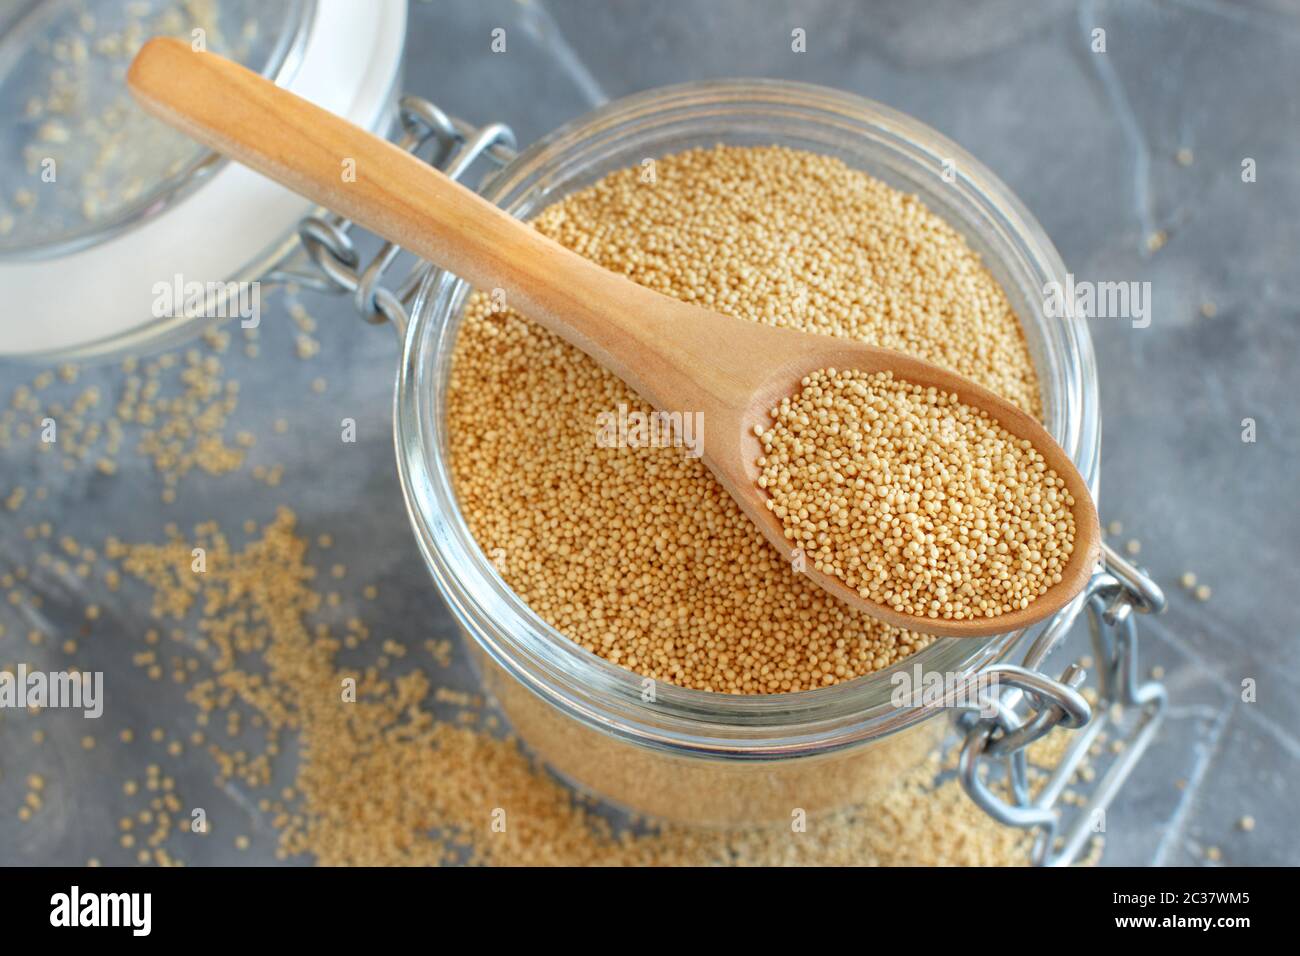 Glass jar of raw Amaranth Grain with a spoon close up Stock Photo